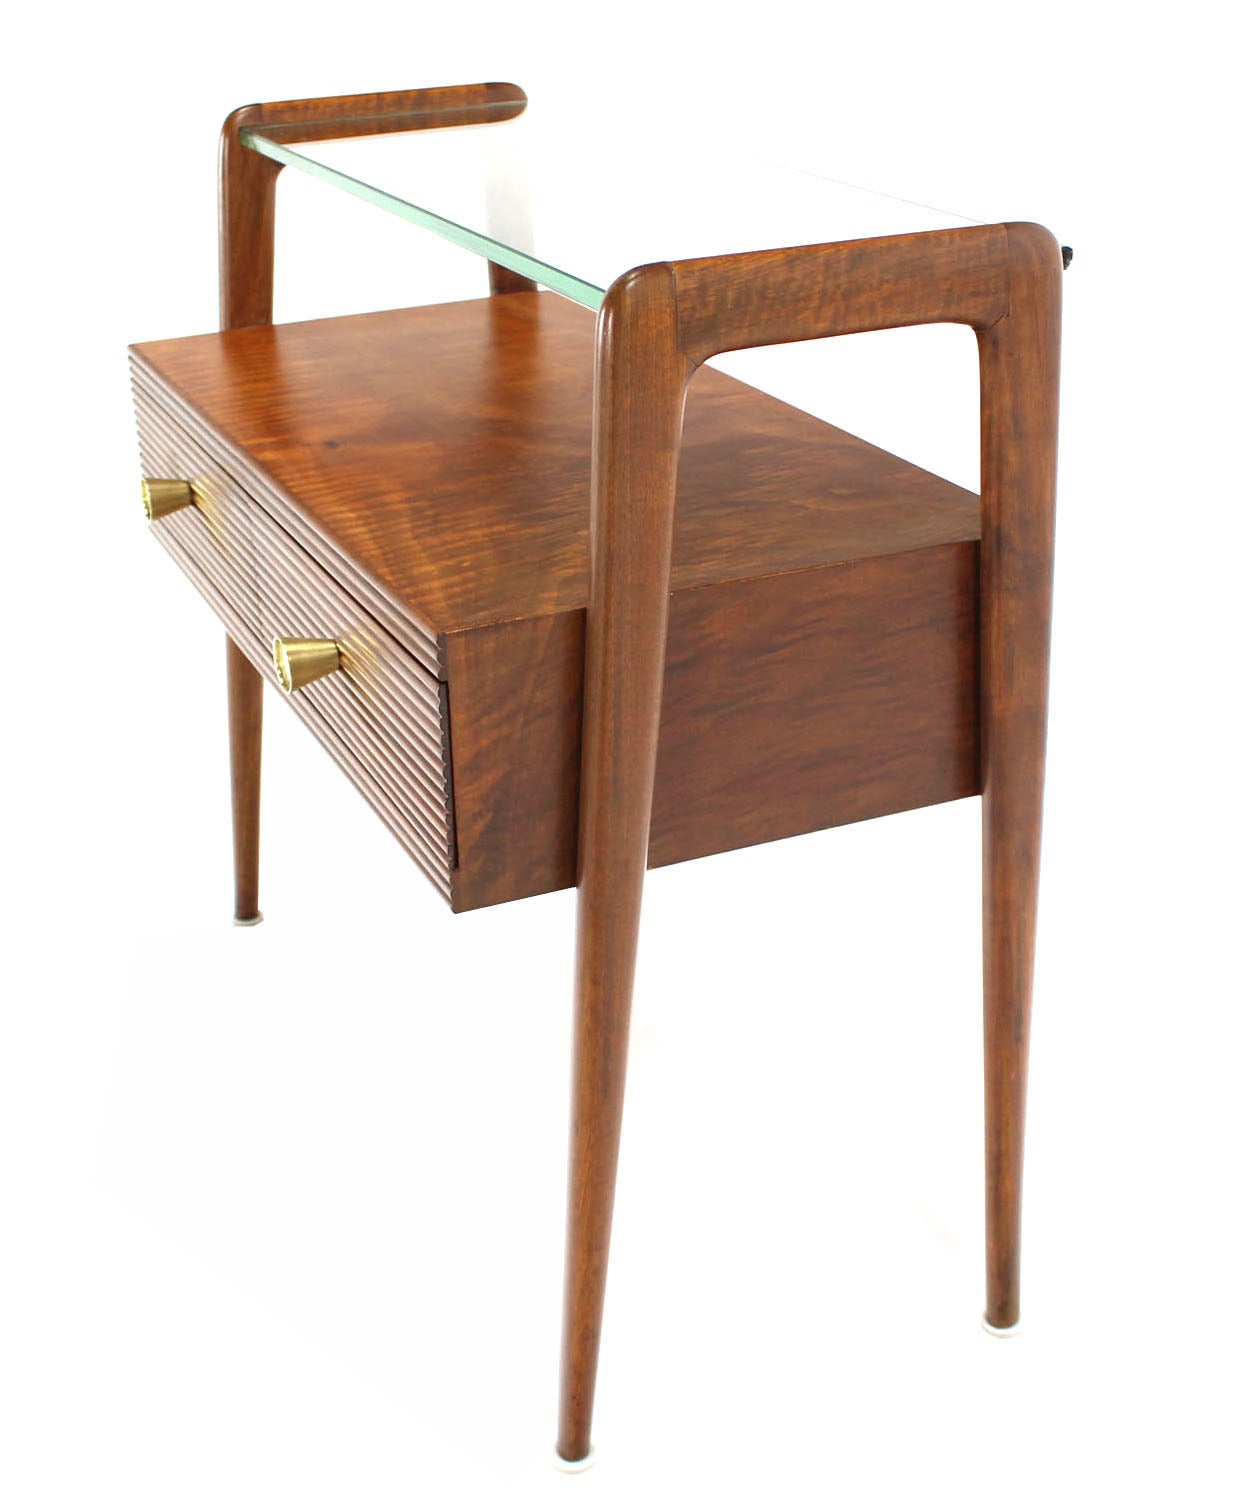 American Pair of Italian Mid-Century Modern Walnut End Tables or Night Stands